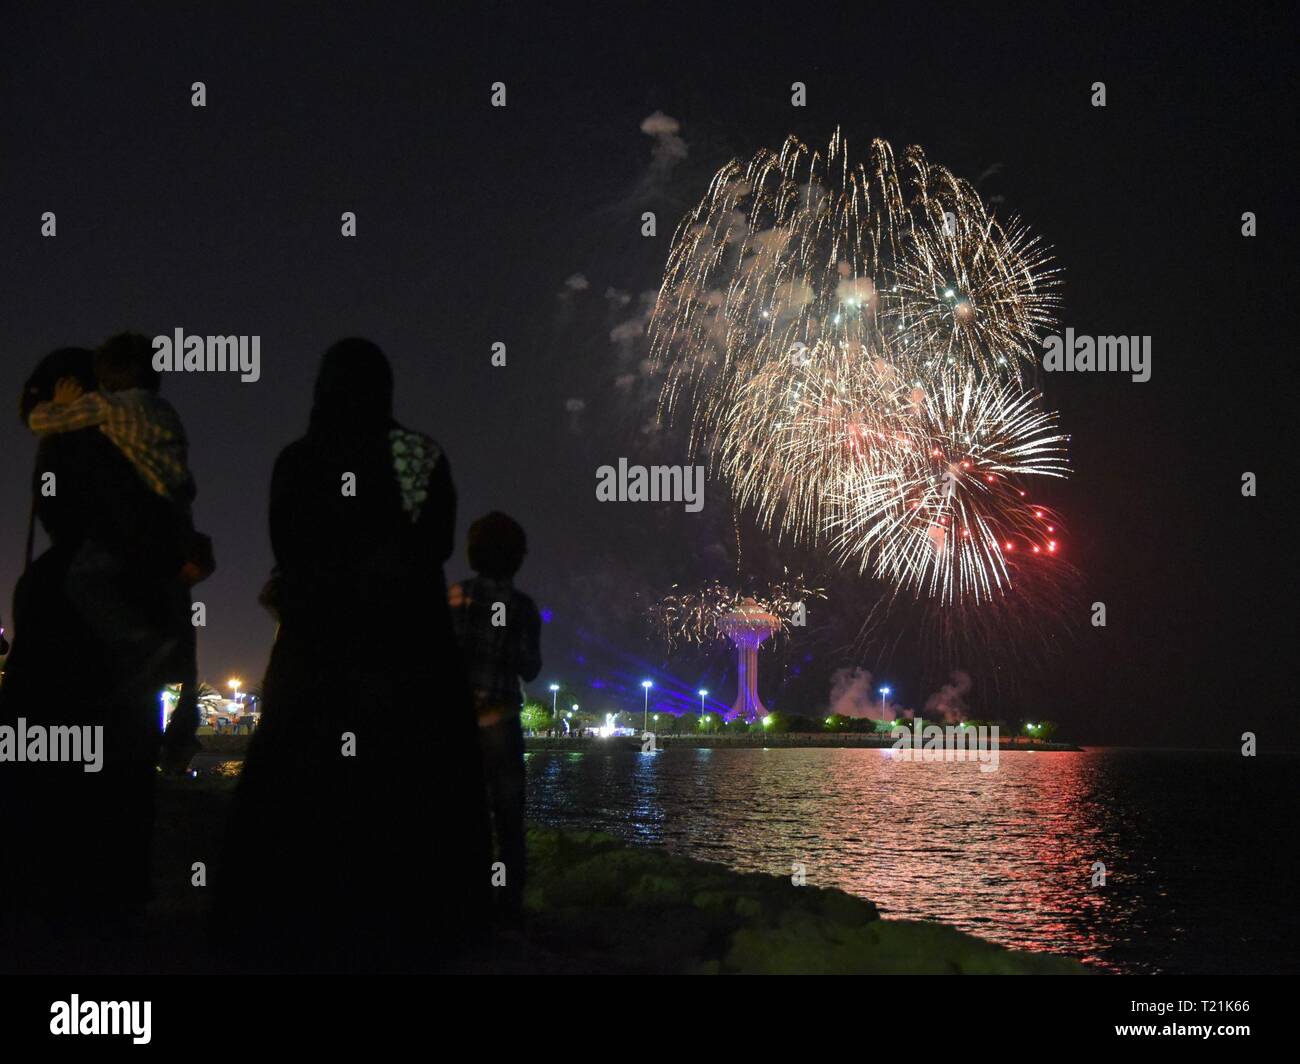 Khobar. 29th Mar, 2019. Visitors take pictures of fireworks during the Sharqiah Season by the Al-Khobar corniche in Eastern Province of Saudi Arabia, March 29, 2019. The Sharqiah Season, held in nine cities in Eastern Province, wrapped up on March 30. Over the period of 17 days, the season entailed a carefully crafted selection of over 100 programs and activities covering culture, sports, education and entertainment. Credit: Tu Yifan/Xinhua/Alamy Live News Stock Photo